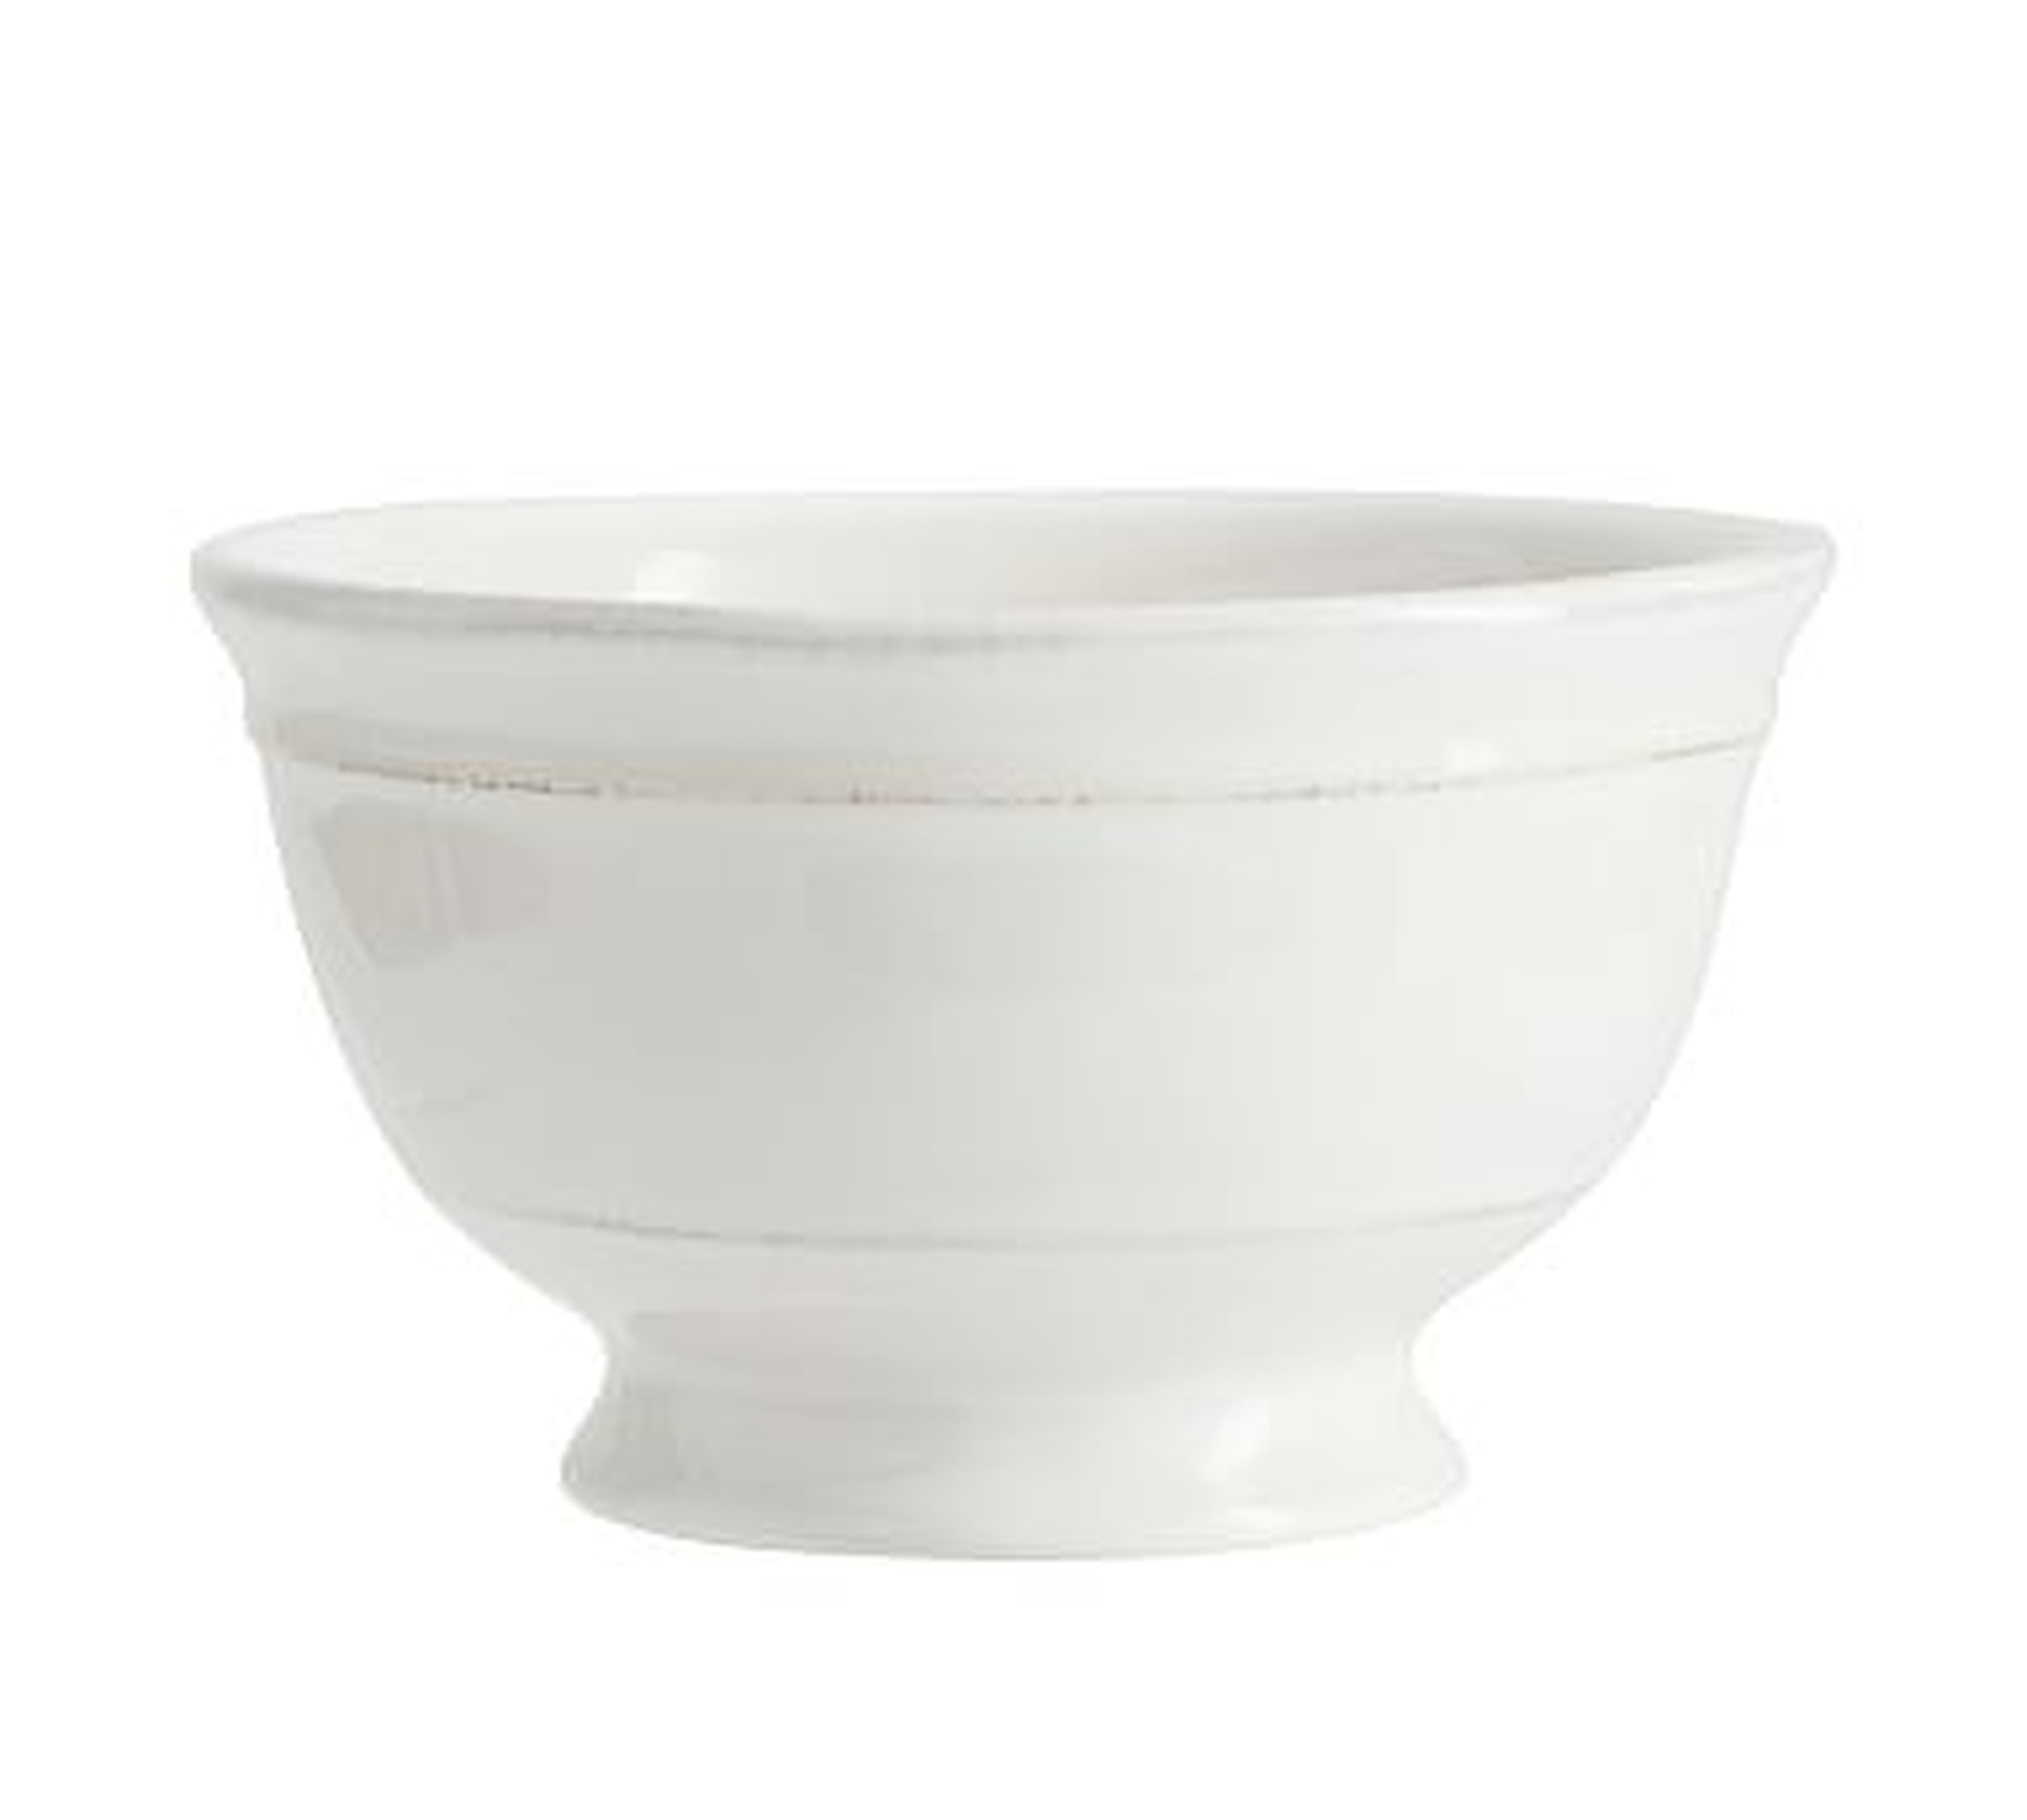 Cambria Stoneware Footed Serving Bowl, Small (5.25"dia. x 3"H) - Stone - Pottery Barn